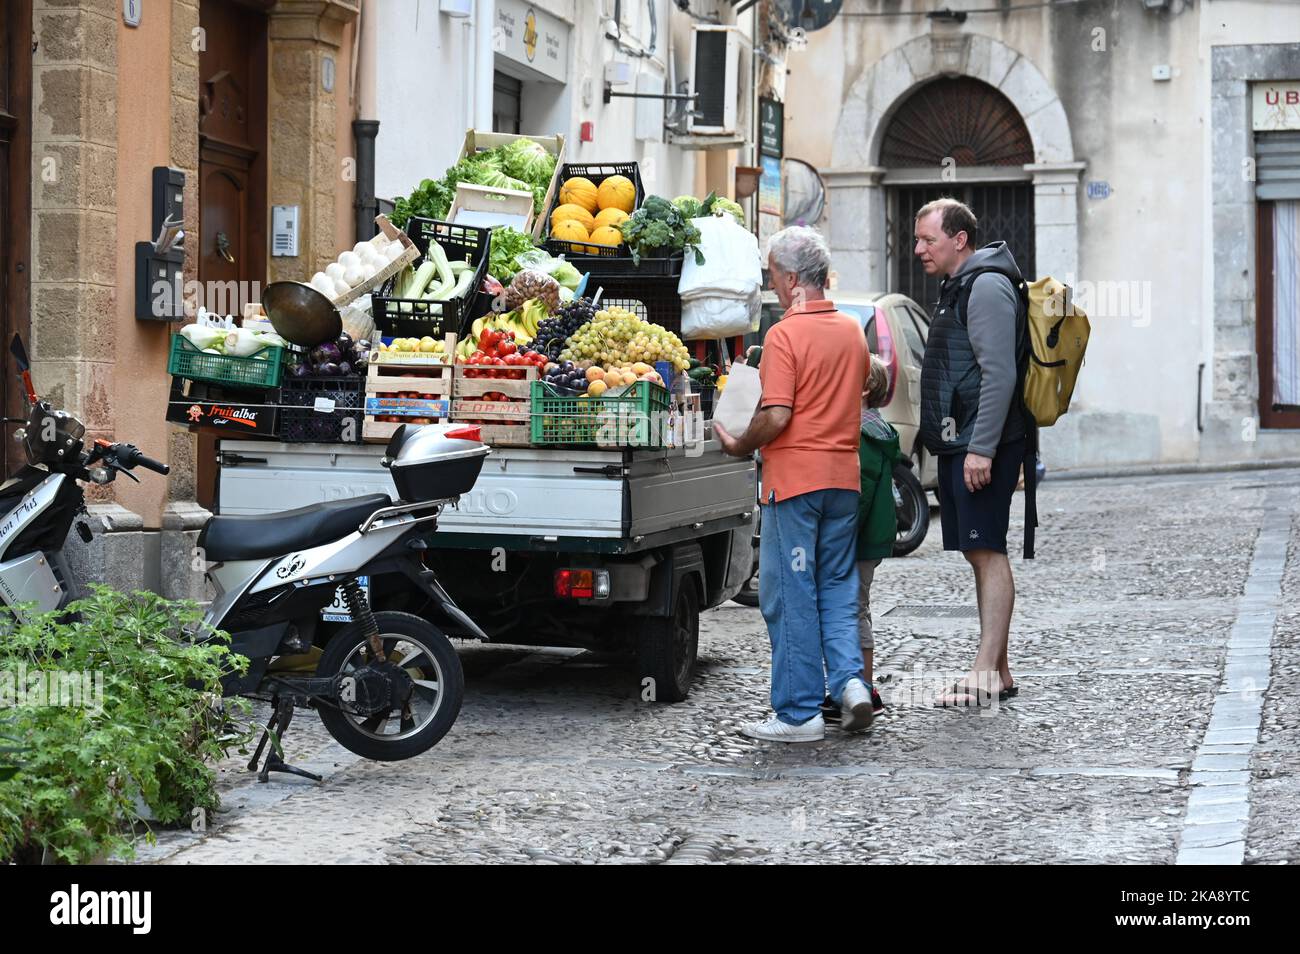 Selling fruit and vegetables on the streets of Cefalu, Sicily Stock Photo